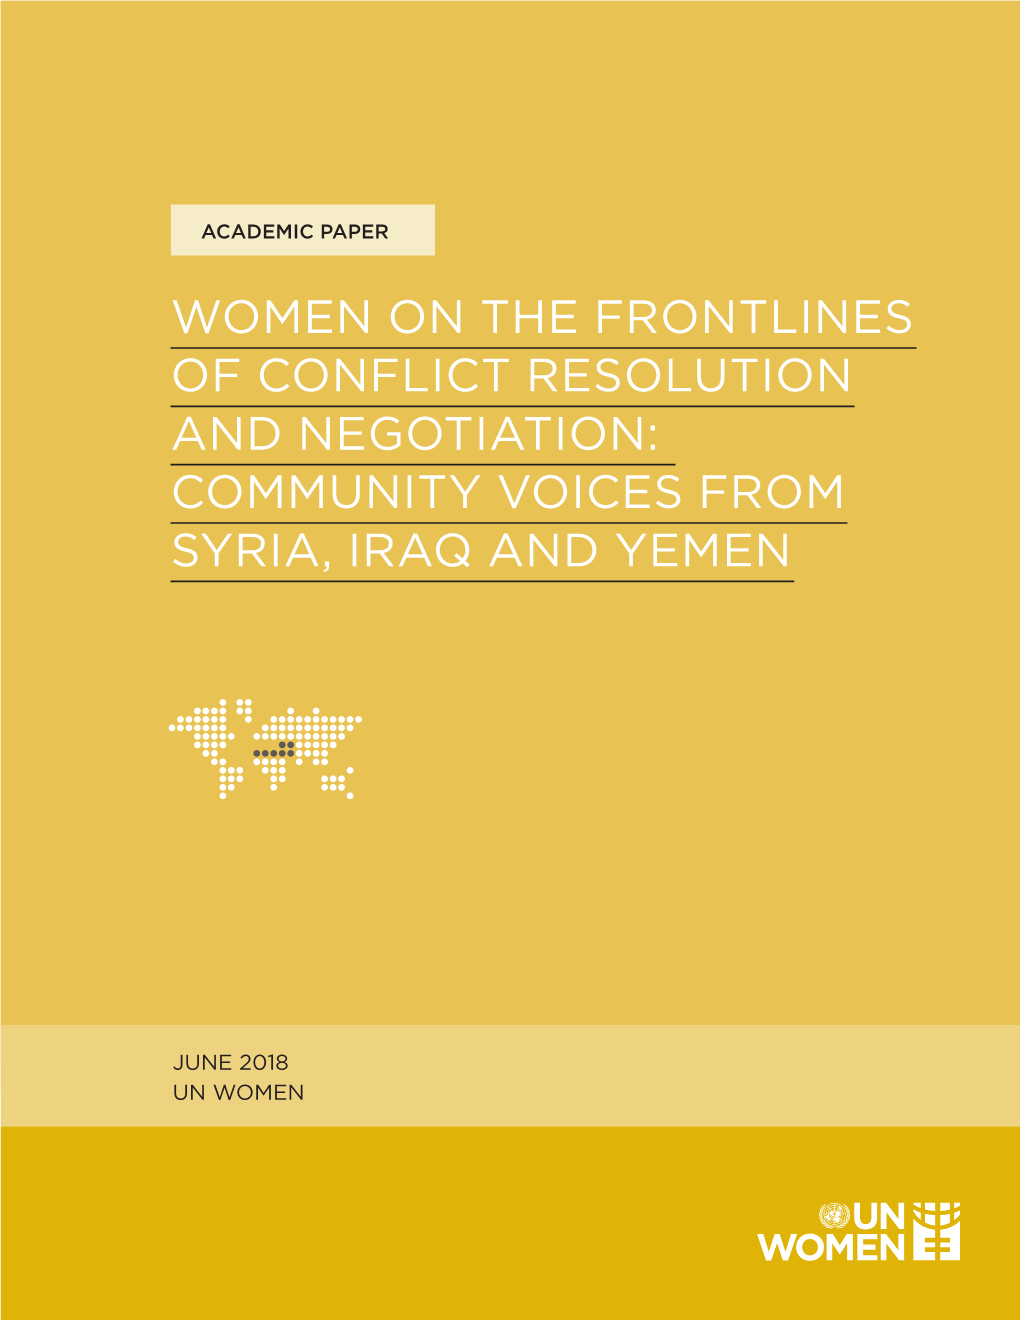 Women on the Frontlines of Conflict Resolution and Negotiation: Community Voices from Syria, Iraq and Yemen